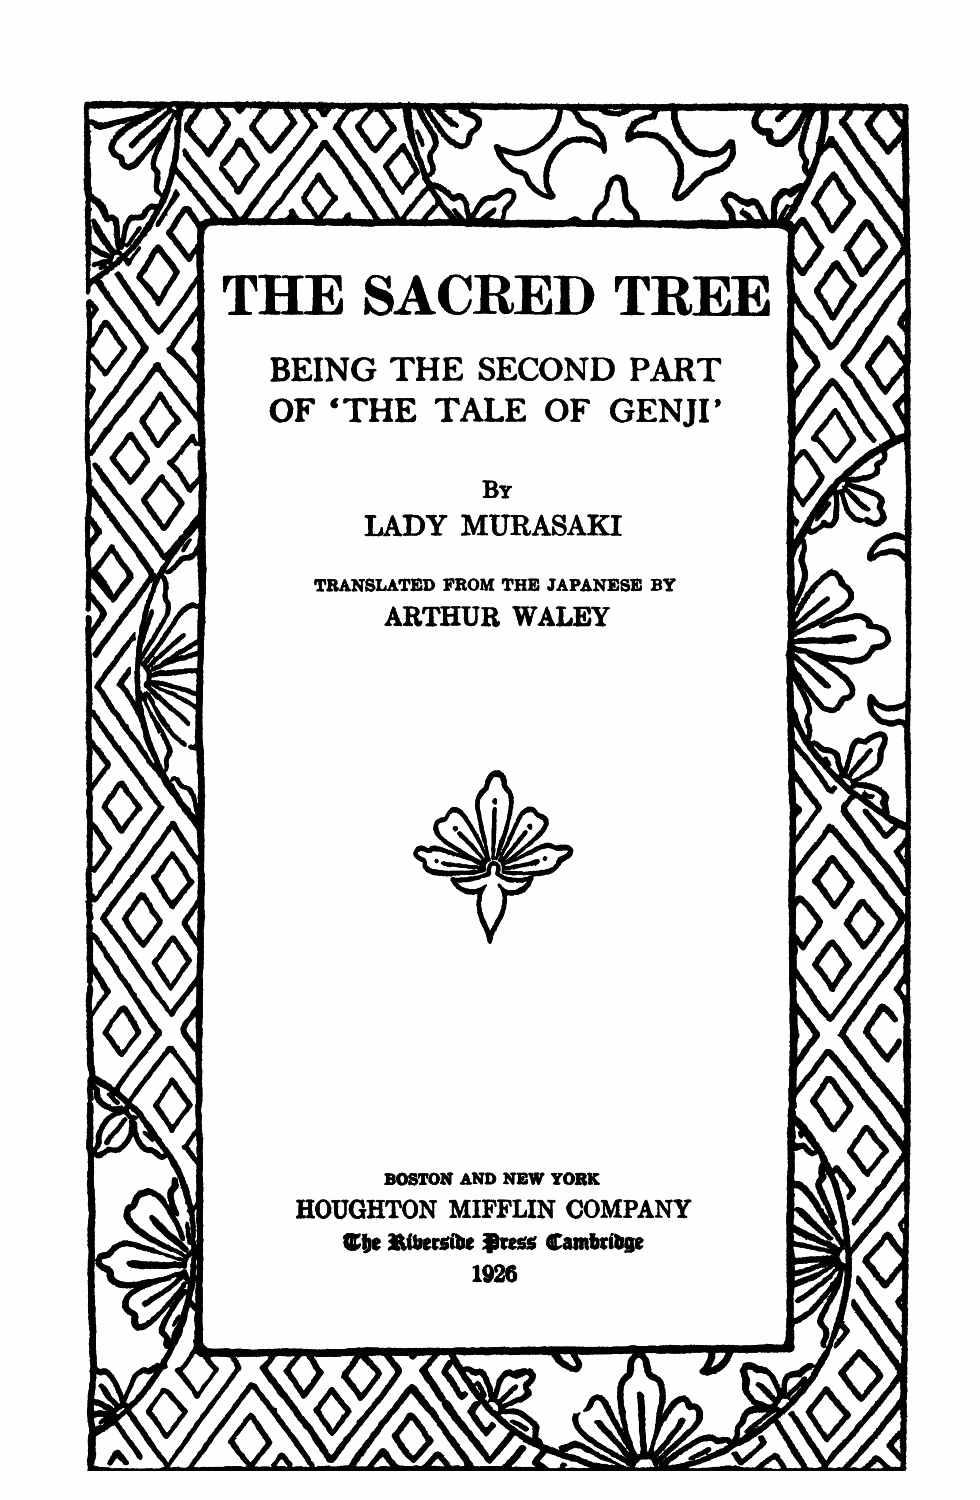 The Sacred Tree, by Lady Murasaki—A Project Gutenberg eBook pic